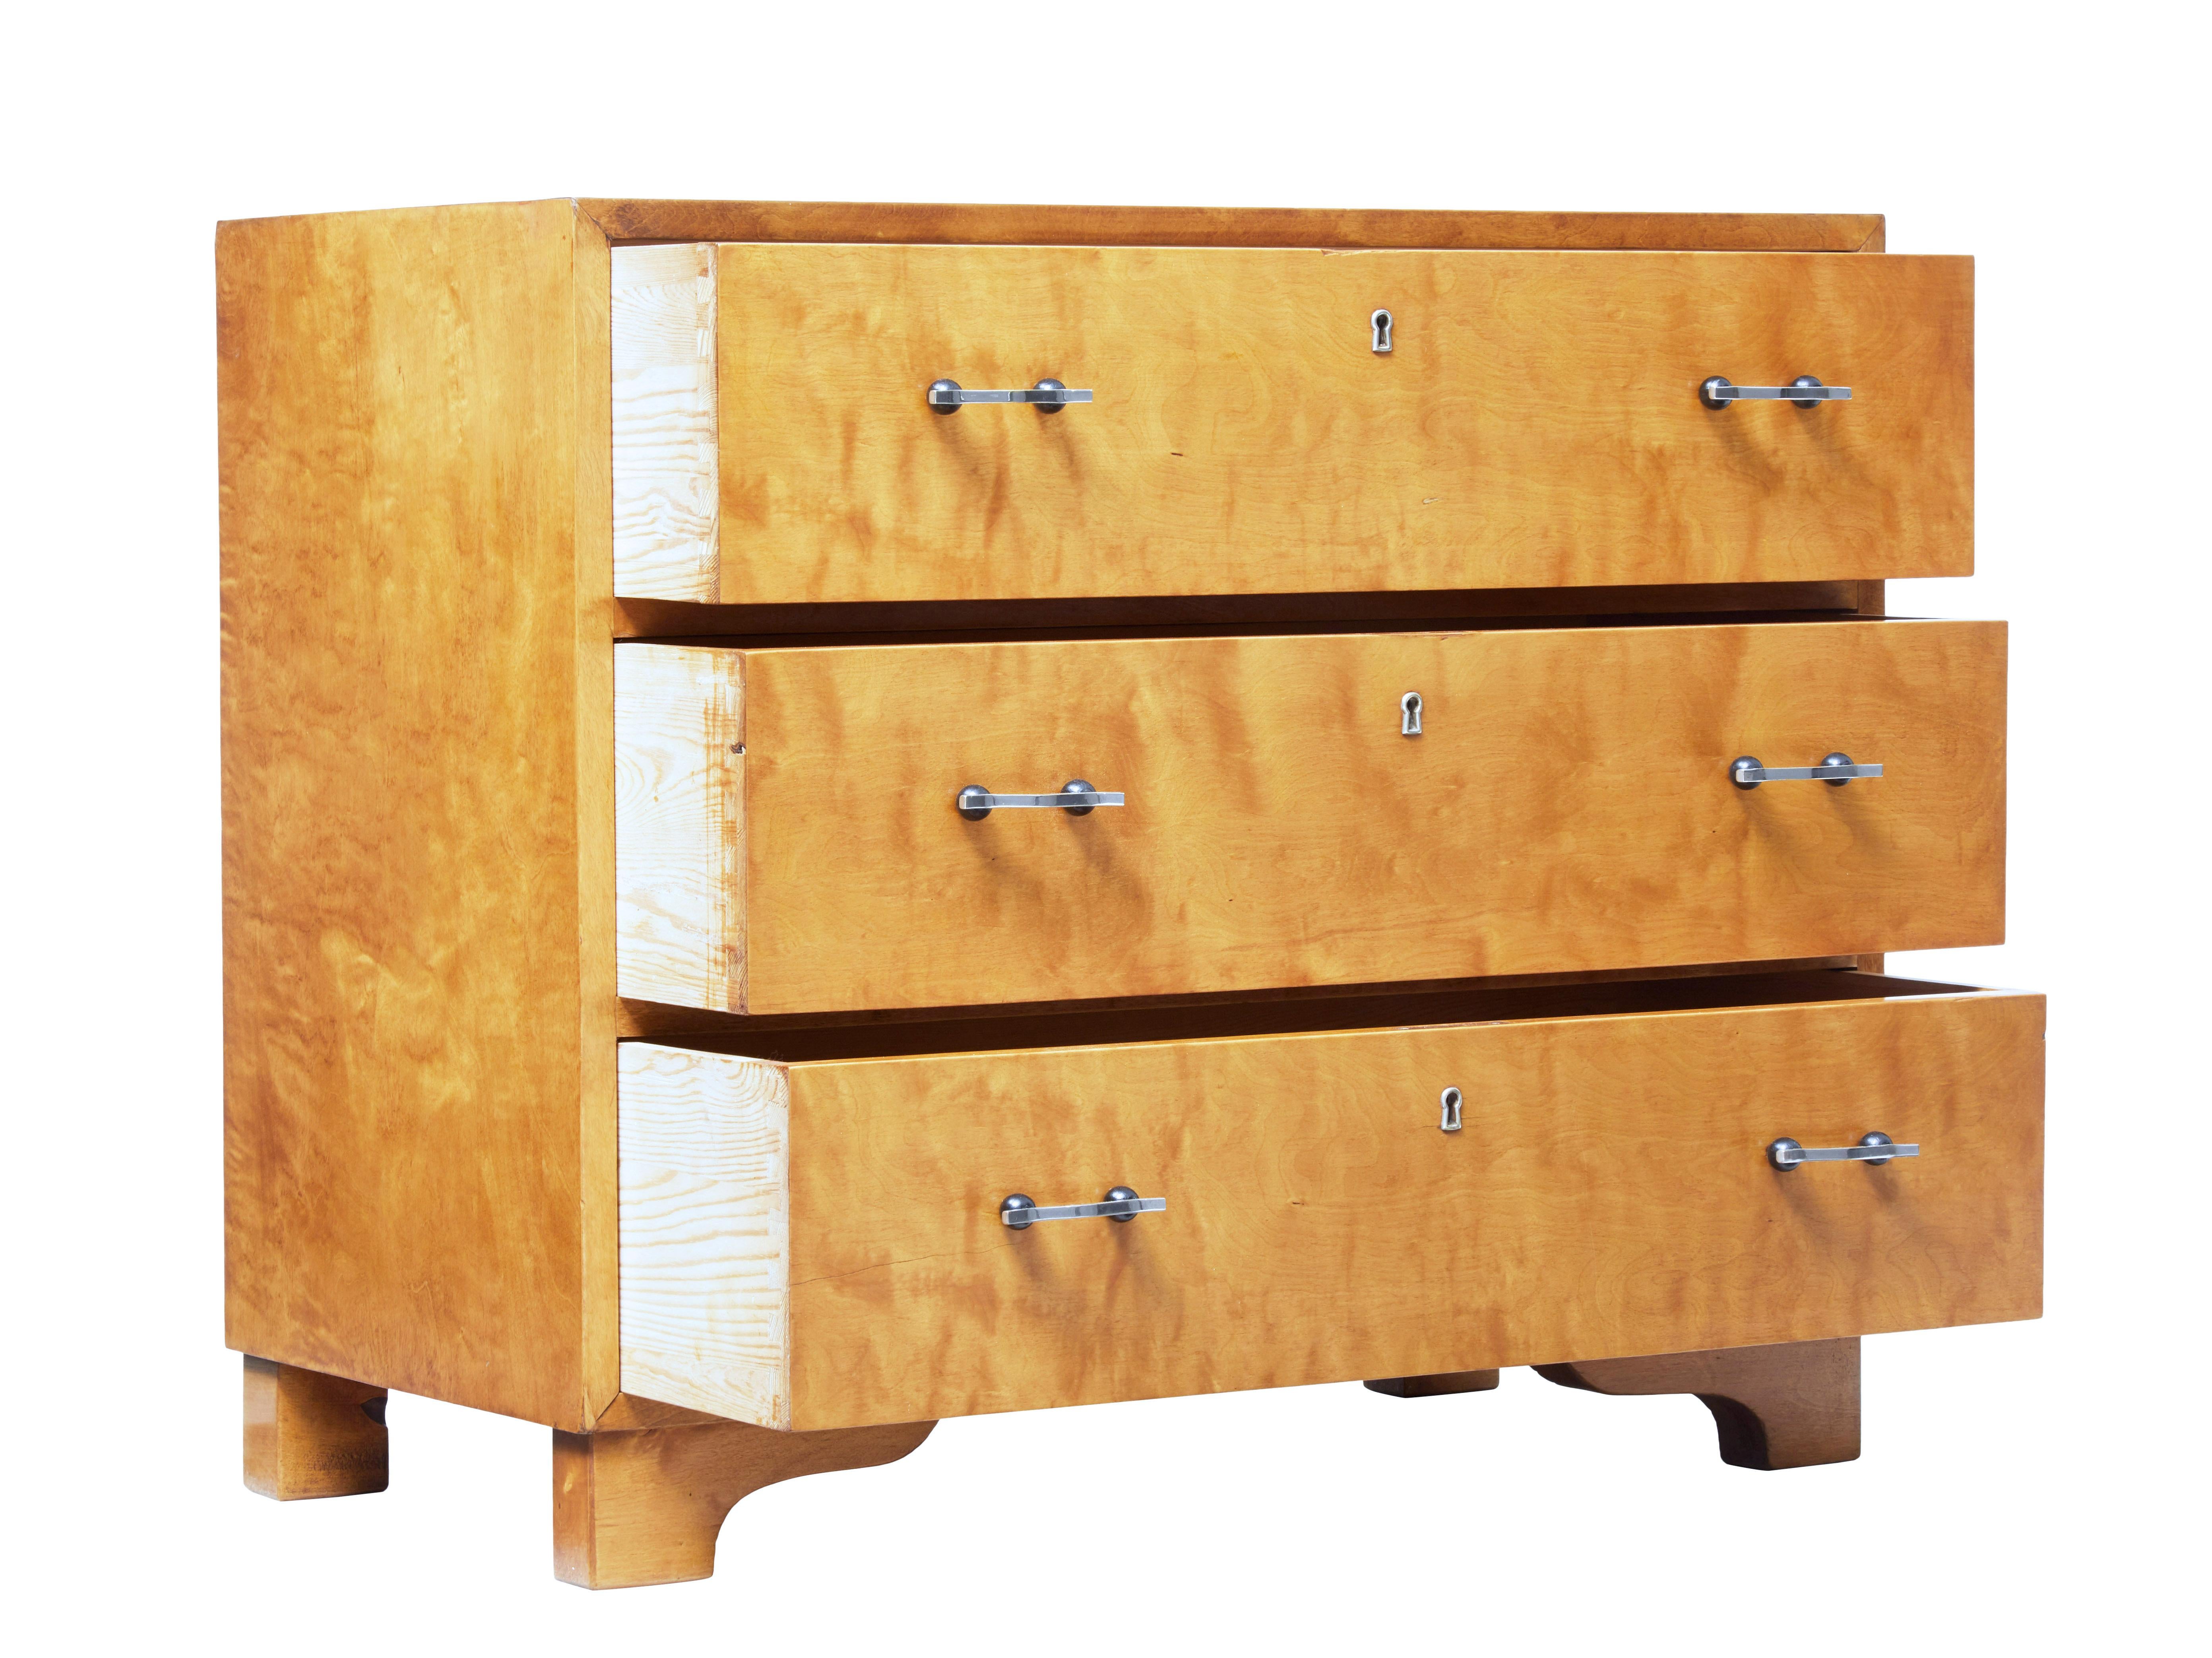 Good quality Swedish chest of drawers, circa 1940.

3 drawers of equal proportion fitted with shaped steel handles and key plates. Rich golden color.

Standing on bracket feet.

Recently restored with minor restorations to veneer, minor